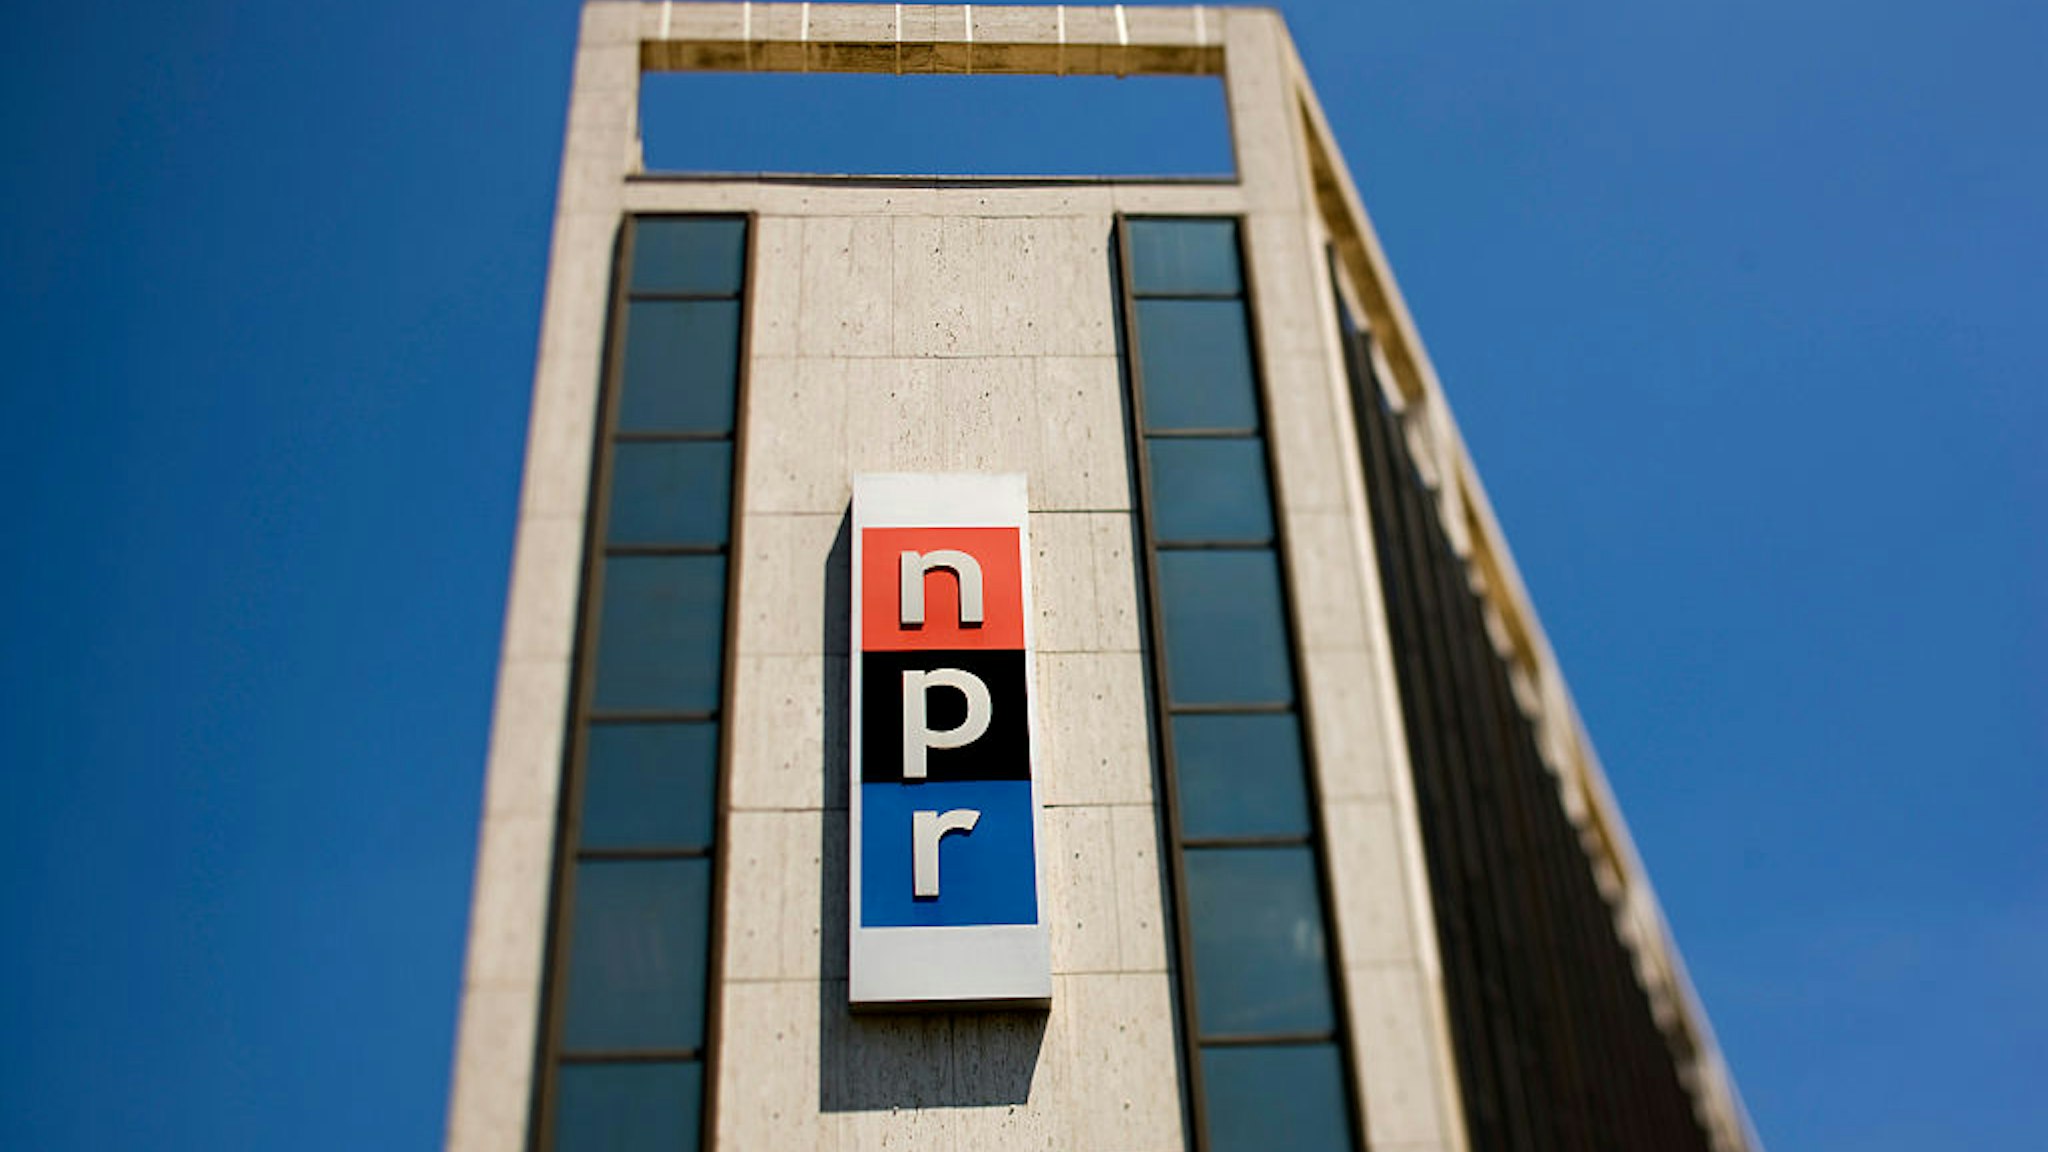 The headquarters of National Public Radio in Washington, DC. NPR is a privately and publicly funded non-profit membership media organization that serves as a national syndicator to 797 public radio stations in the United States. (Photo by Brooks Kraft LLC/Corbis via Getty Images)